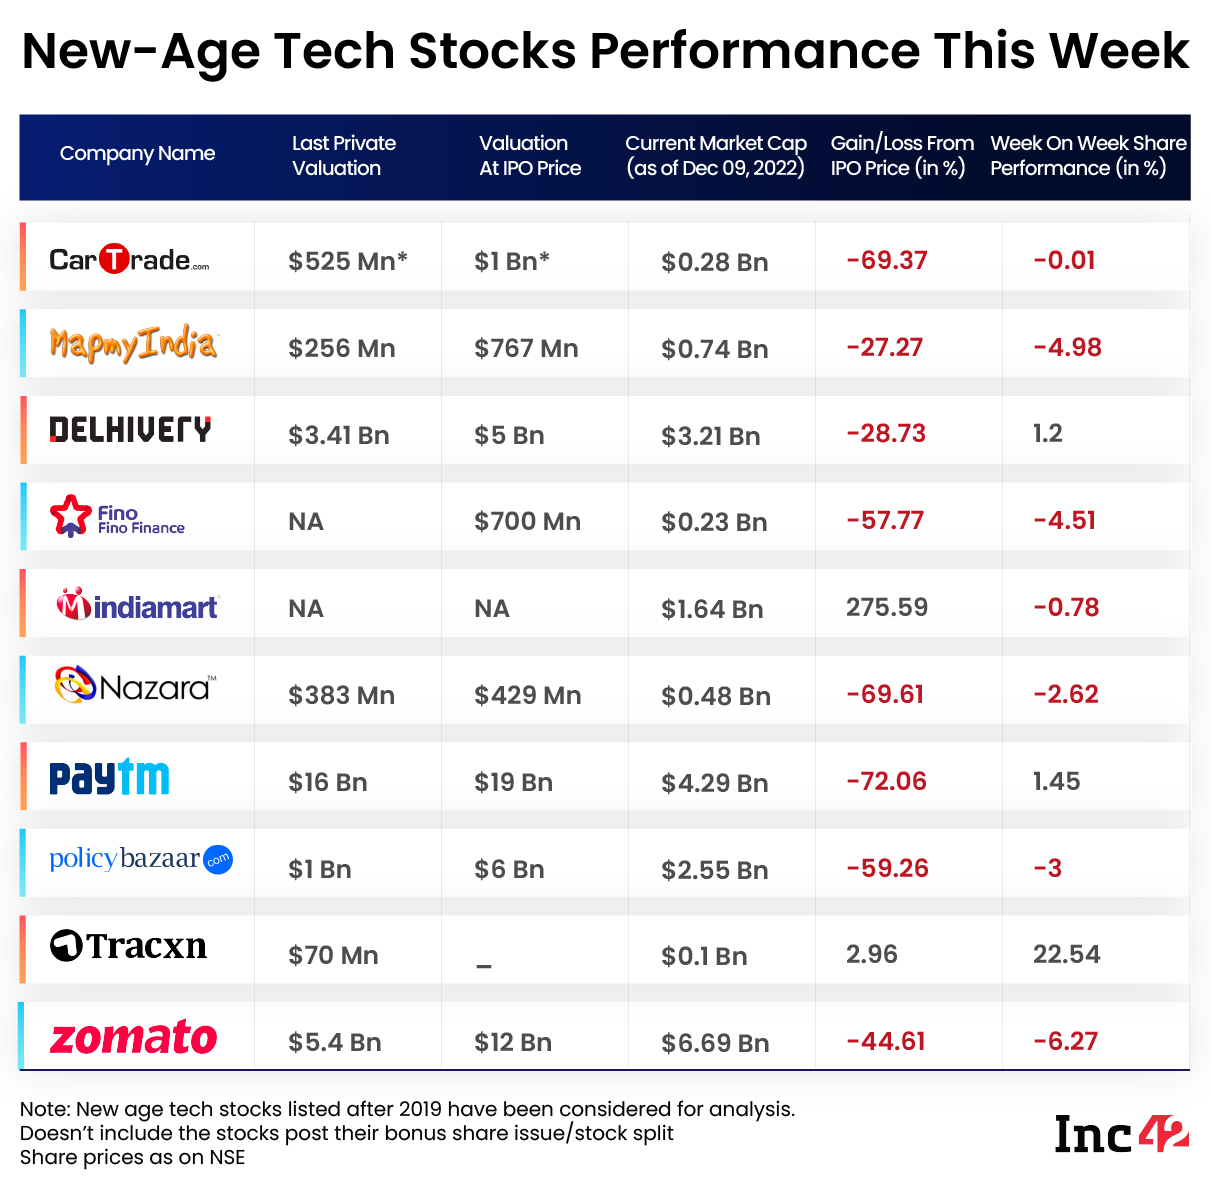 New-age tech stock performance table